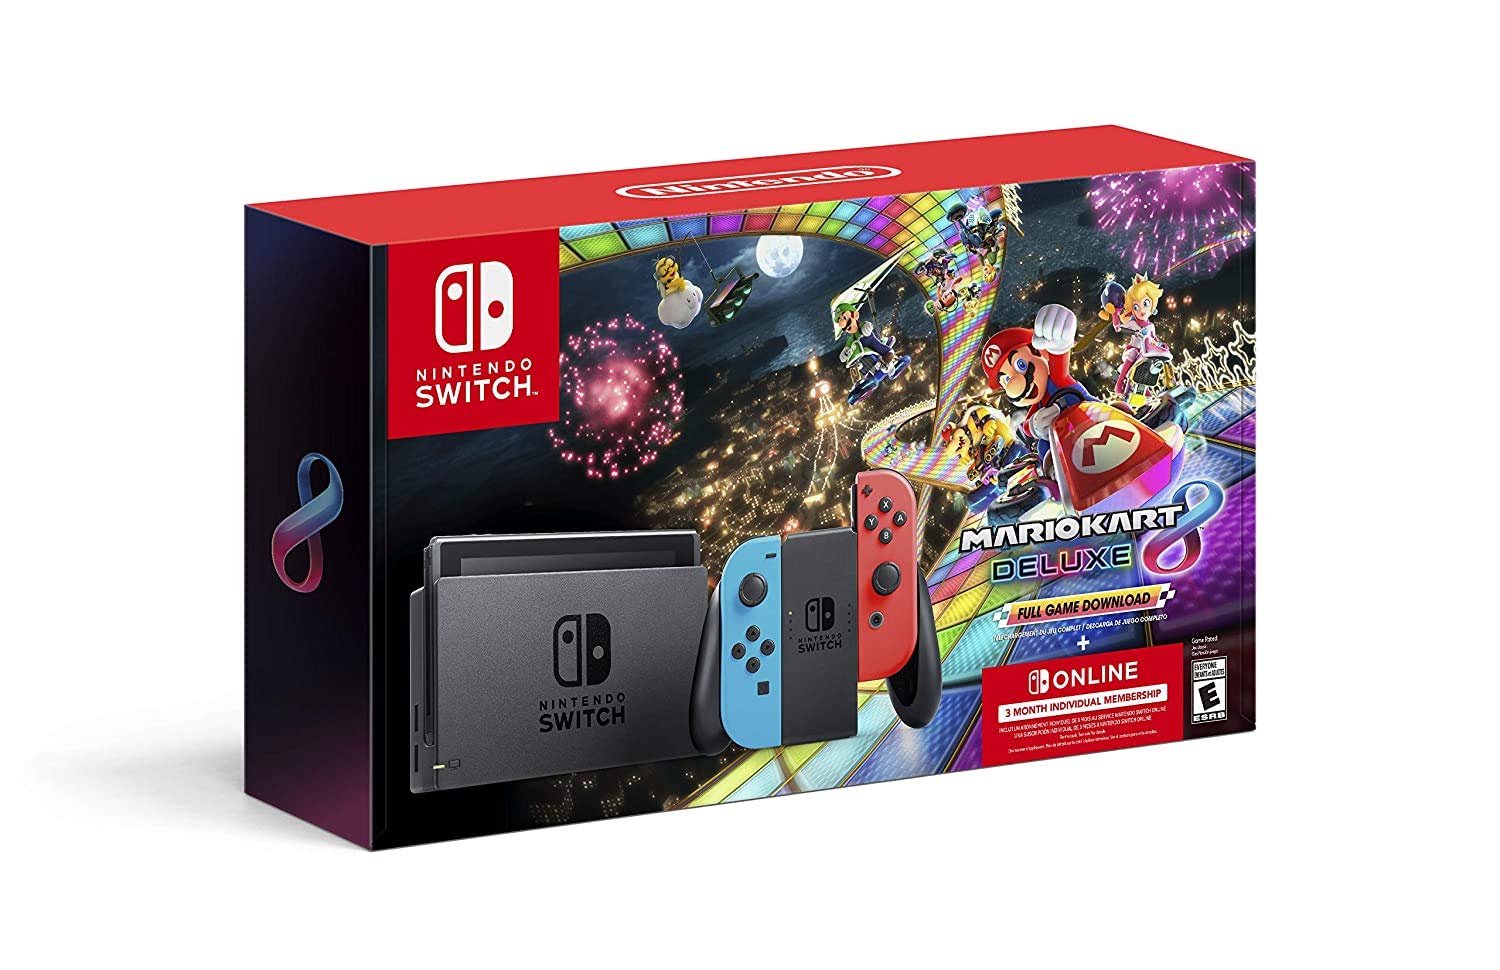 2022 Nintendo Switch Console with Mario Kart 8 Deluxe - Neon Red/Blue Joy-Con, 6.2" Touchscreen LCD Display, Marxsol 12-in-1 Accessories - image 2 of 9